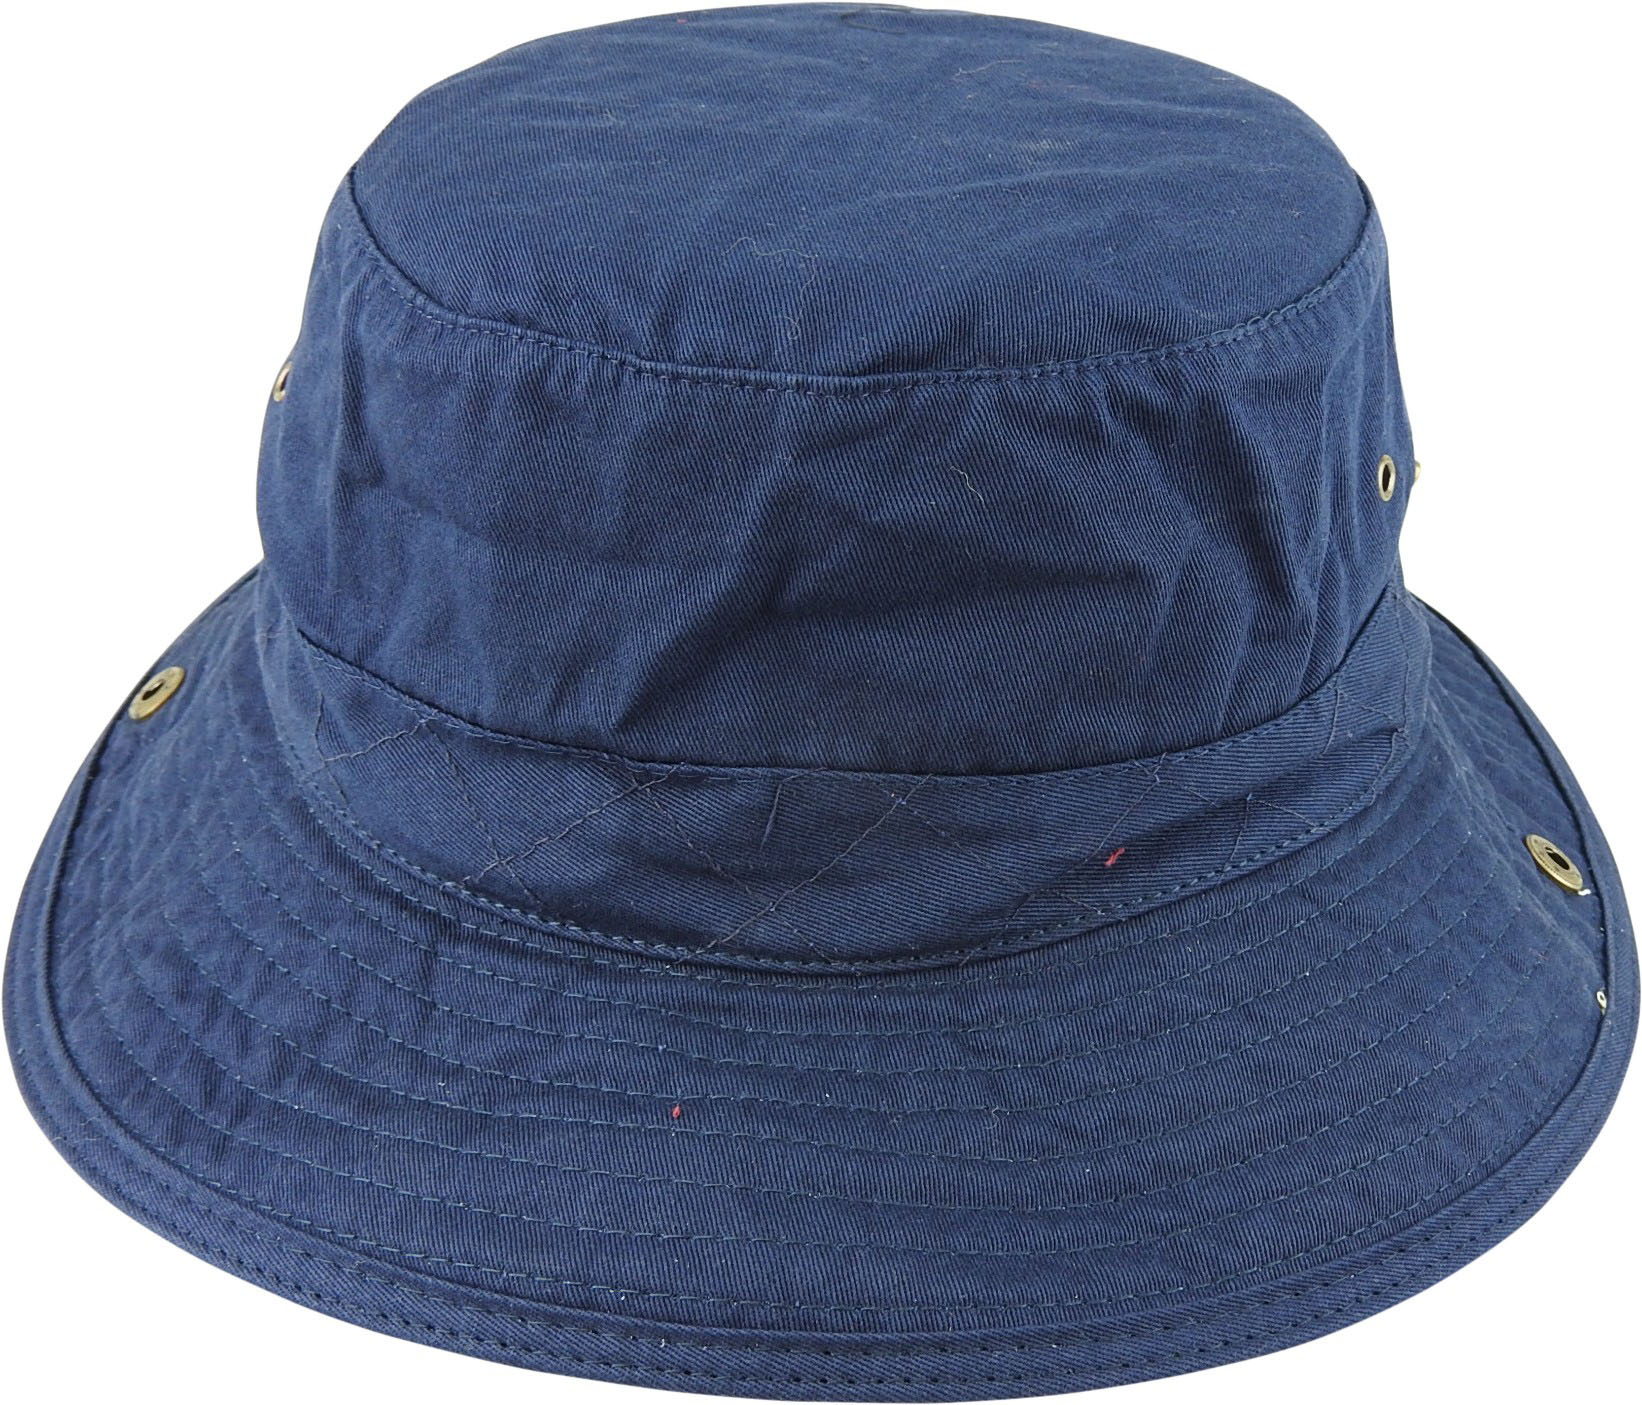 WASHED TWILL BOONIE - Avenel Hats